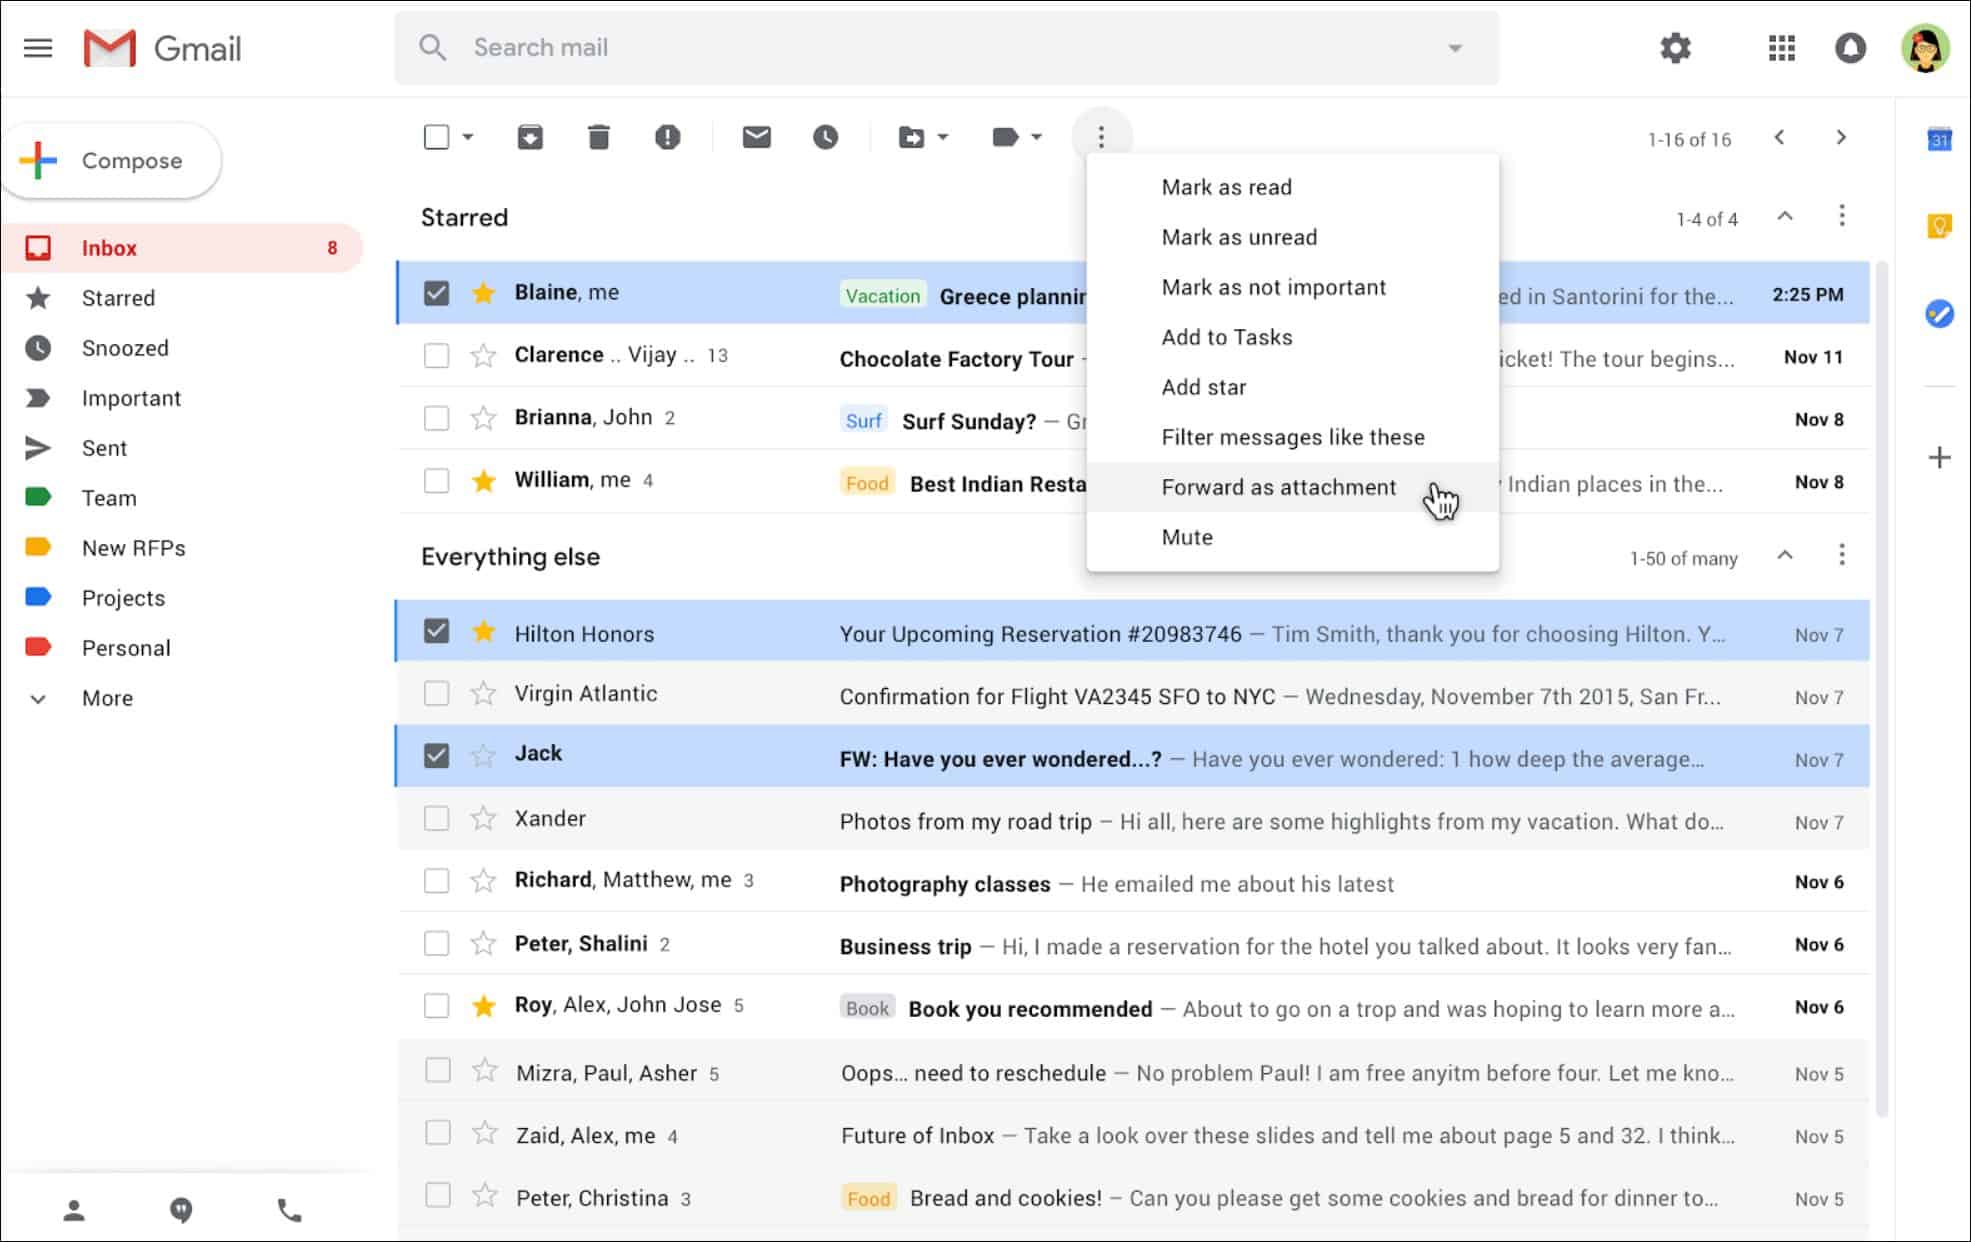 Google Allows Sending Emails as Attachements in Gmail - 47